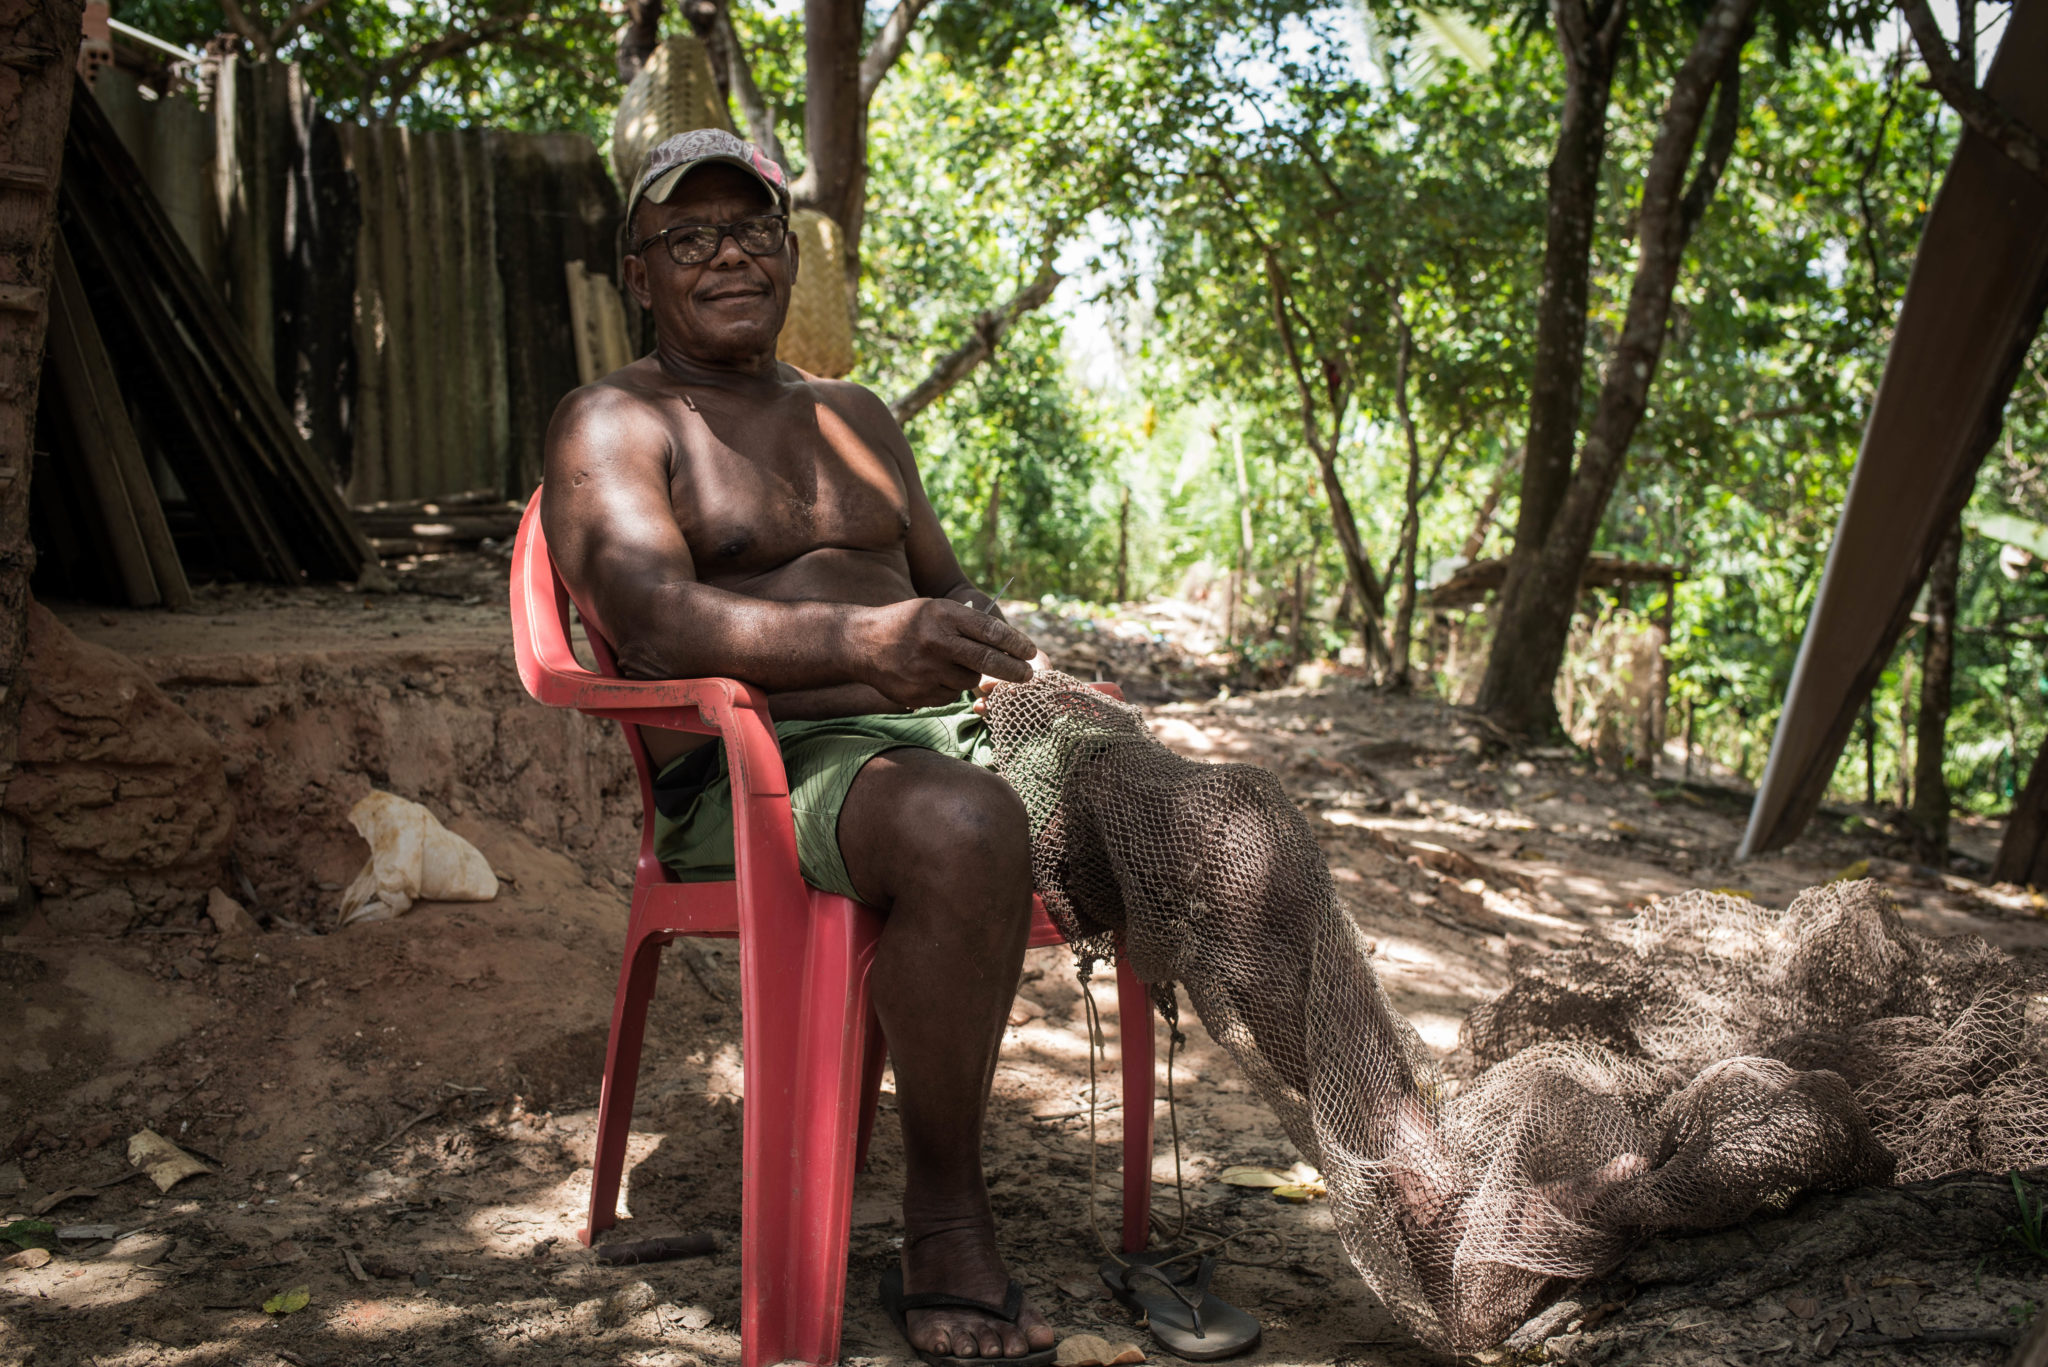 Carlos Augusto Barbosa, a fisher who lives in one of the communities near Cajueiro fixes a net for fishing crab, which are increasingly scarce in the region (image: Ingrid Barros)